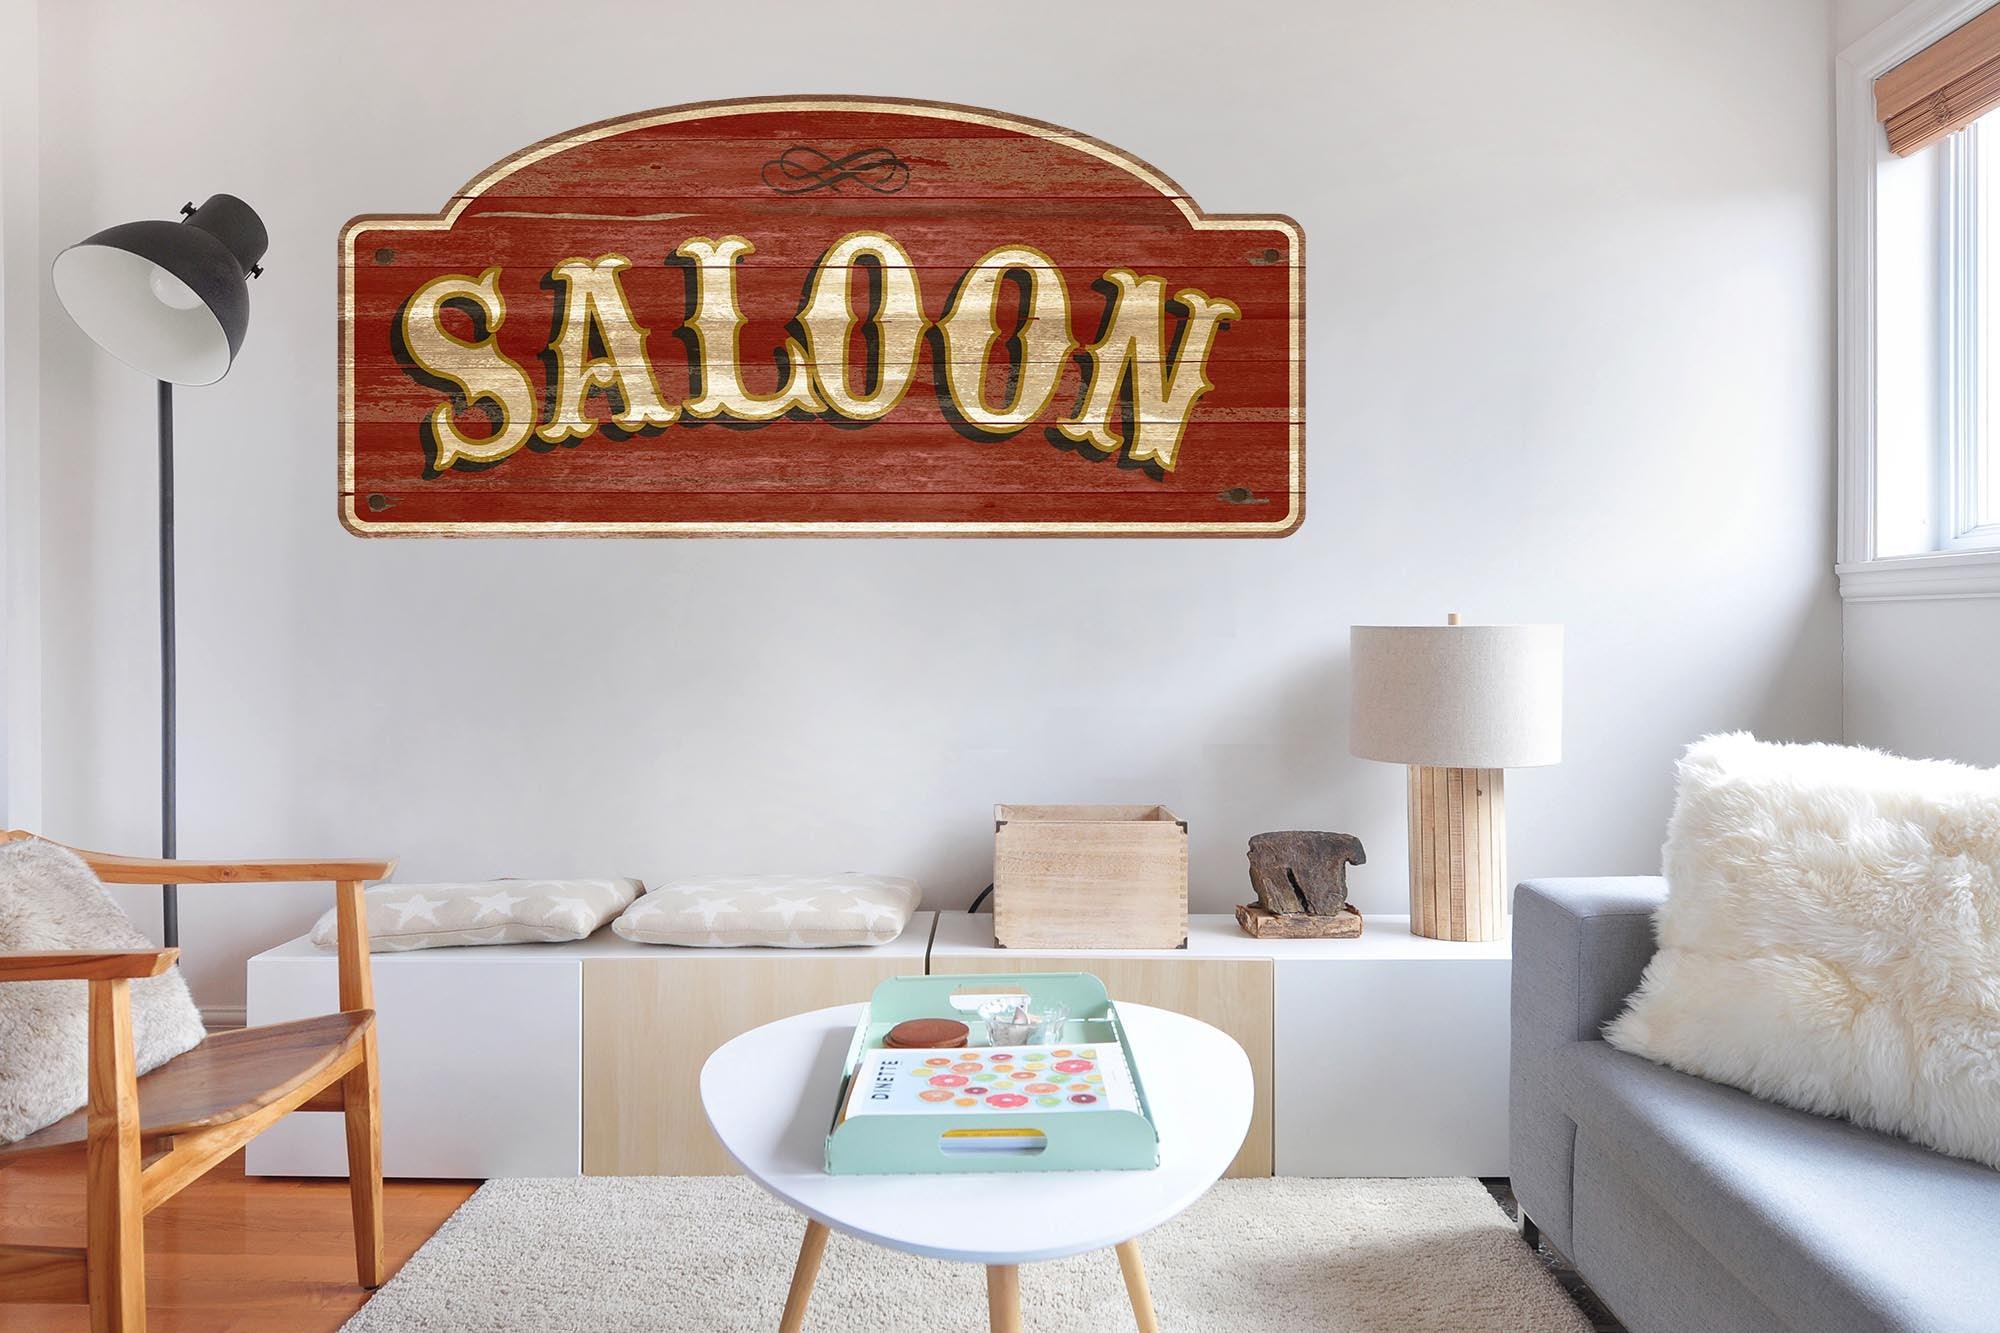 CoolWalls.ca DieCut Saloon Retro Bar Sign Decal, Wall Decal, Peel-N-Stick and Removes Easily Anytime